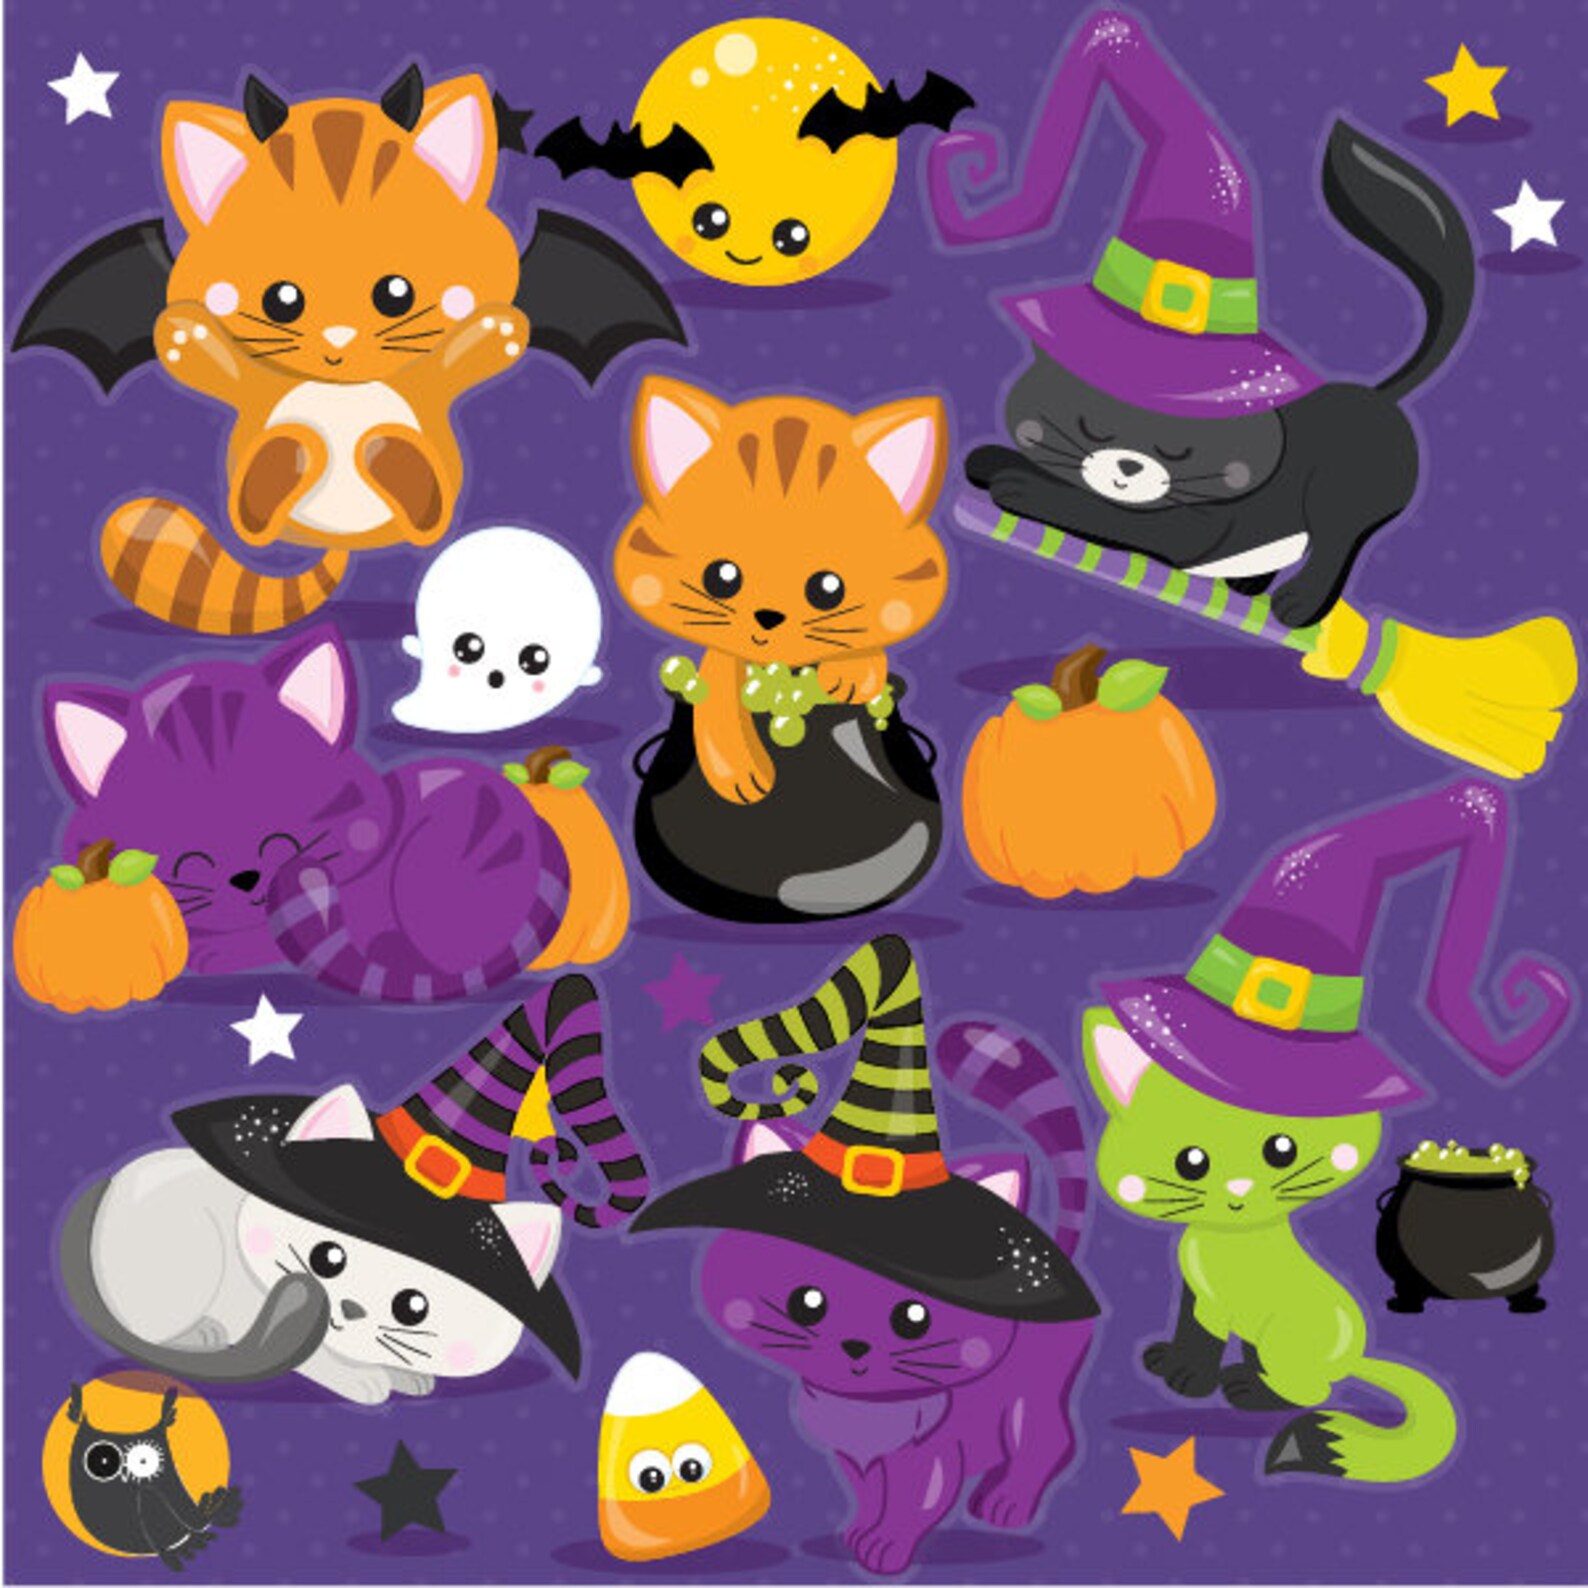 BUY 20 GET 10 OFF Halloween clipart commercial use, cat clipart vector grap...